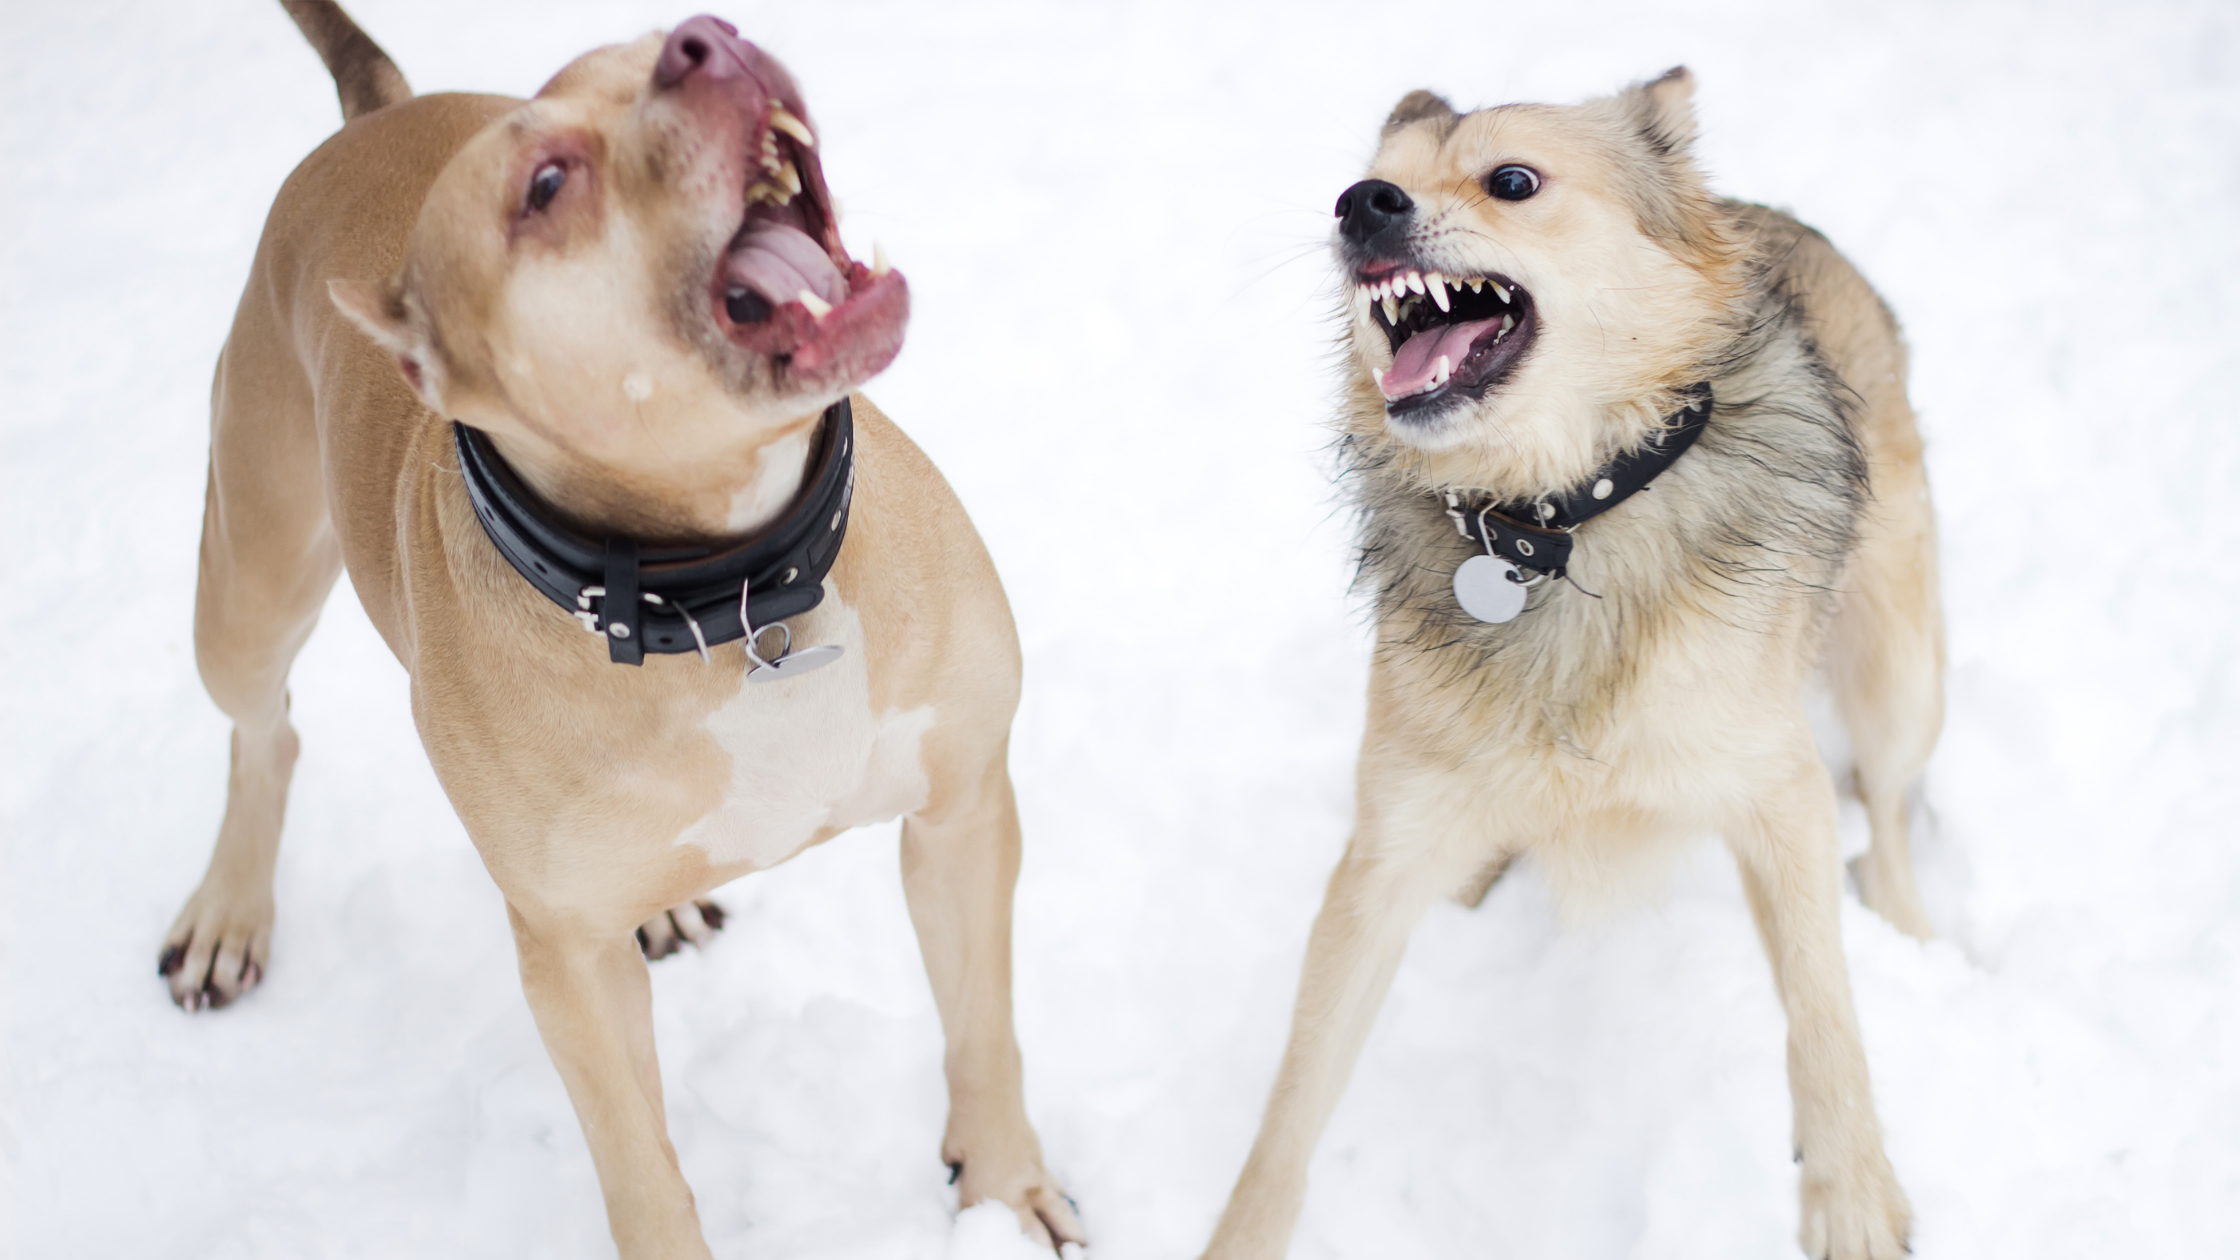 Dog-To-Dog Aggression and How To Control It?